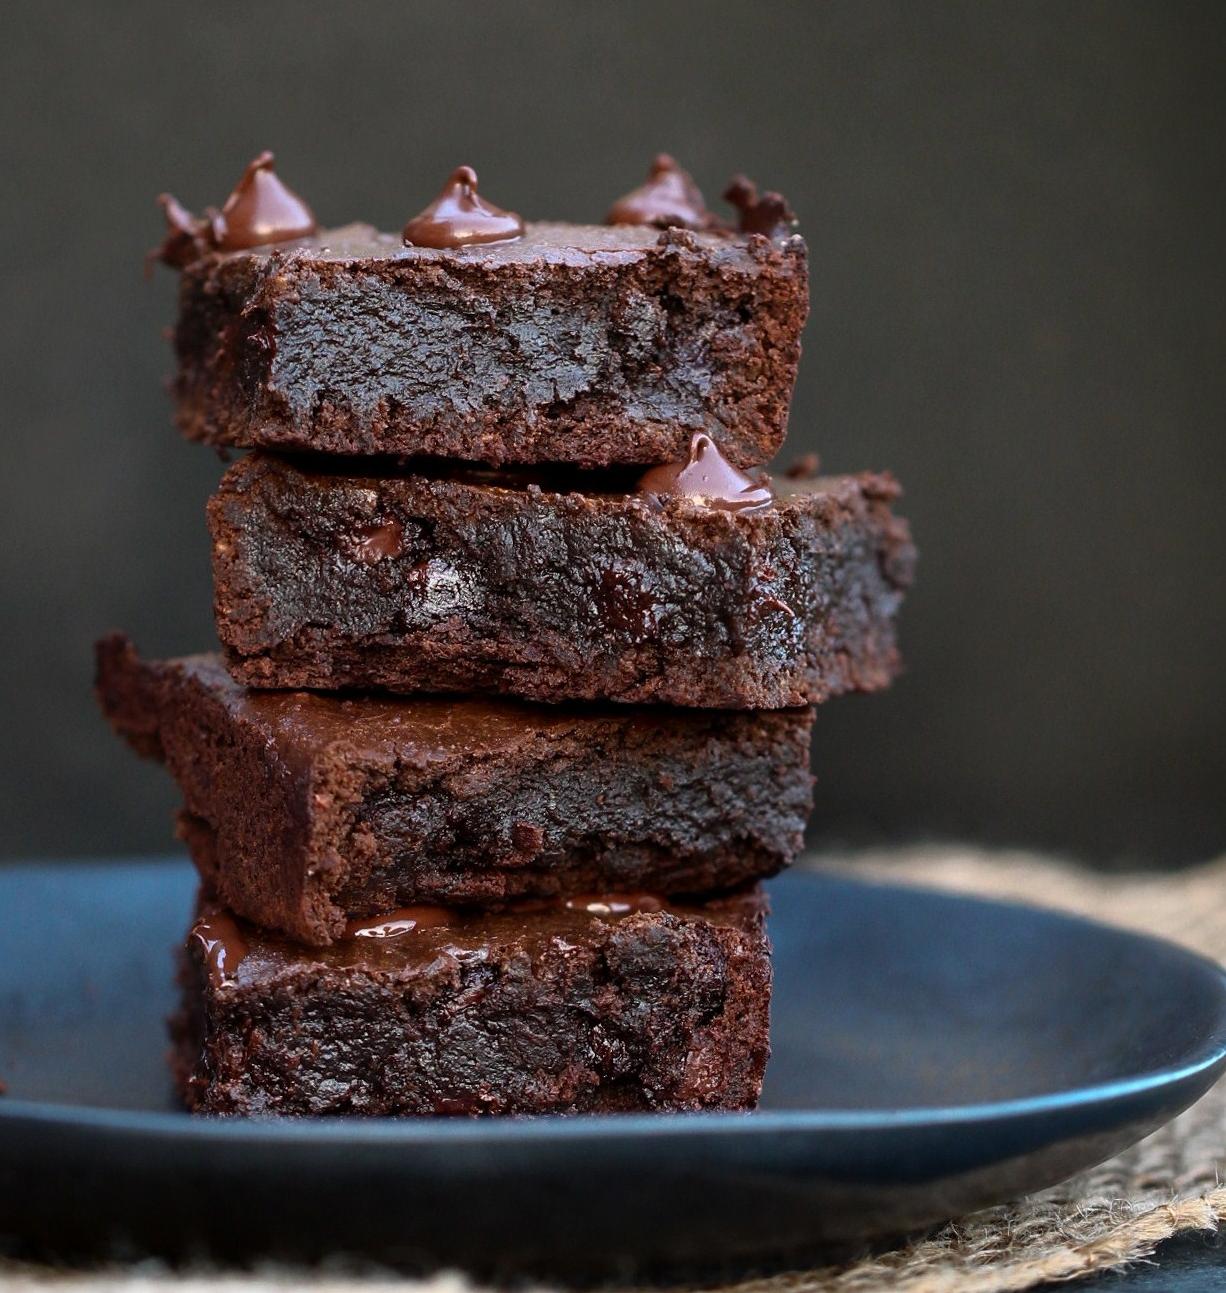  These brownies are the perfect dessert for anyone with dietary restrictions.